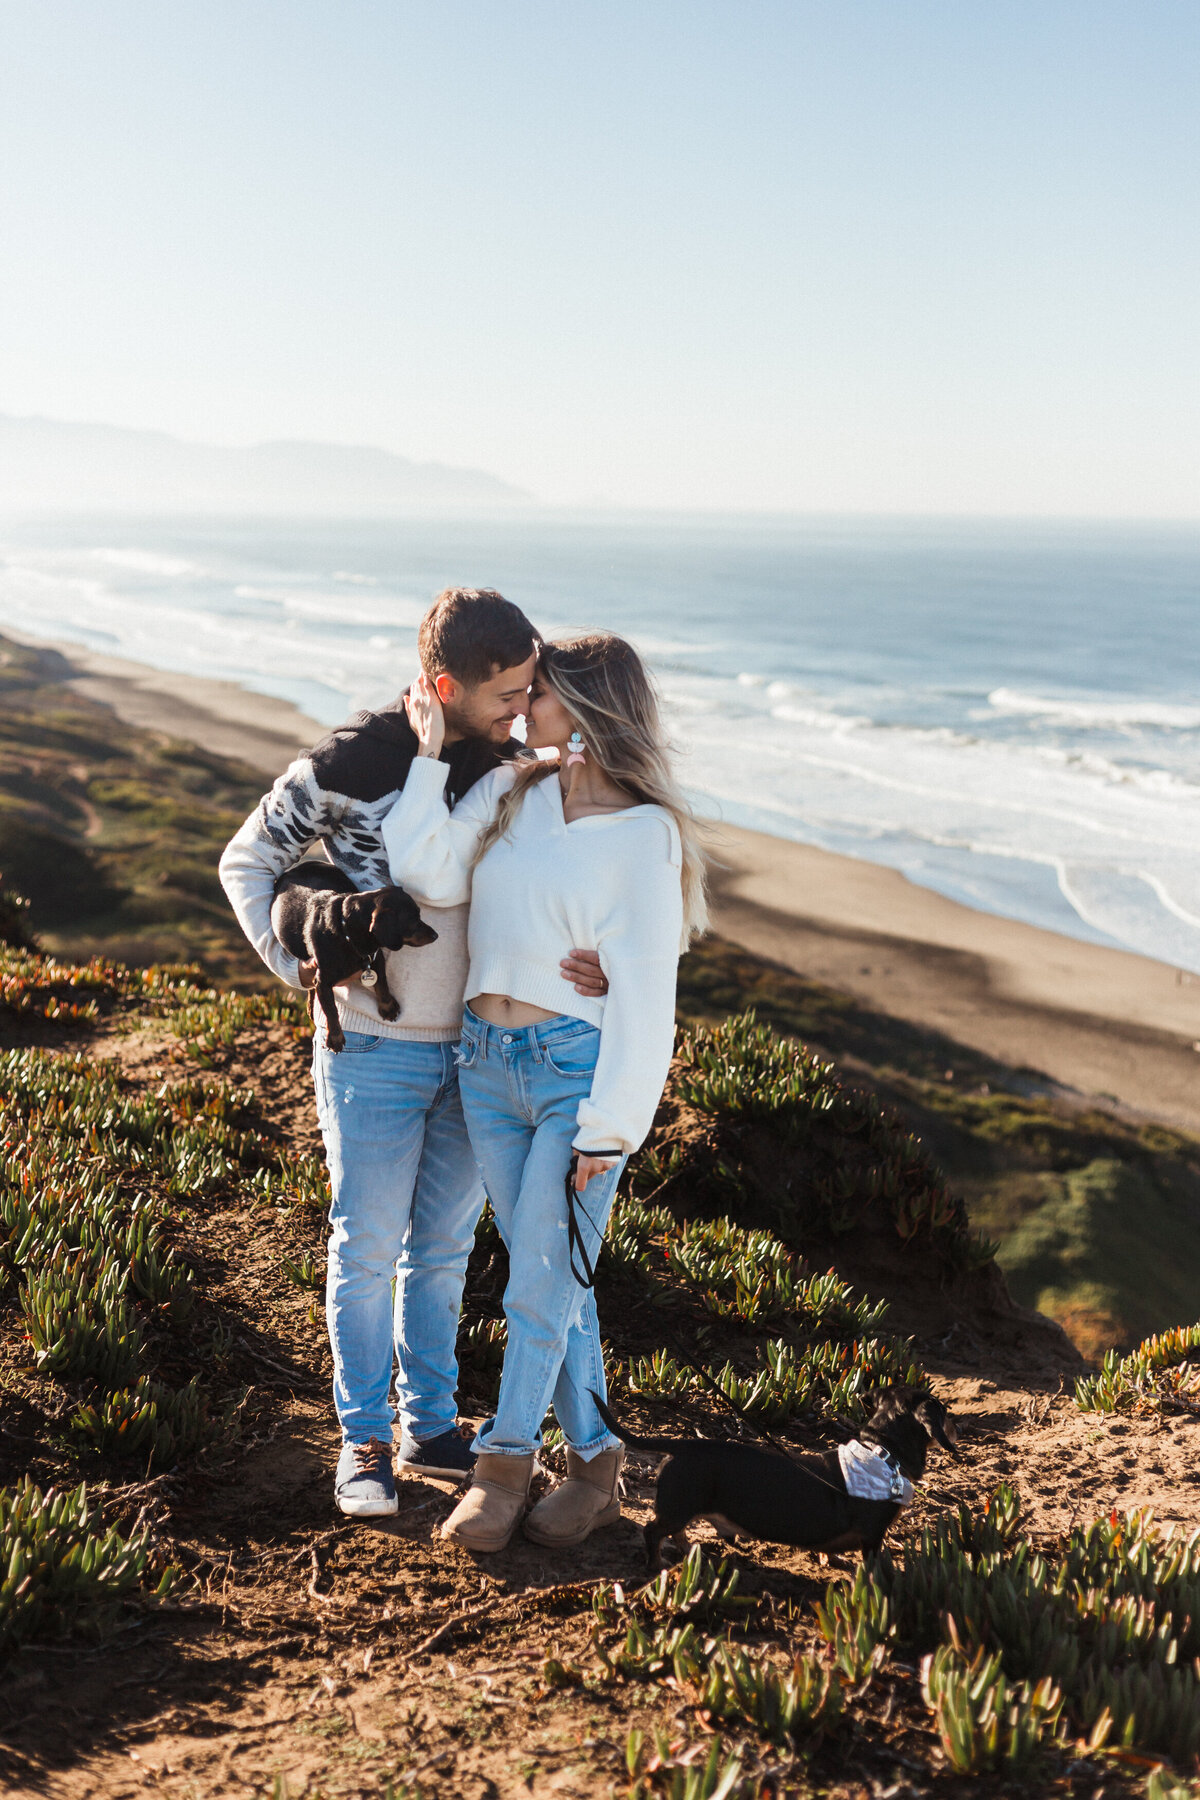 skyler maire photography - fort funston couples photos, couple with dogs, couples photos with dogs, bay area couples photographer, couples beach photography-4792